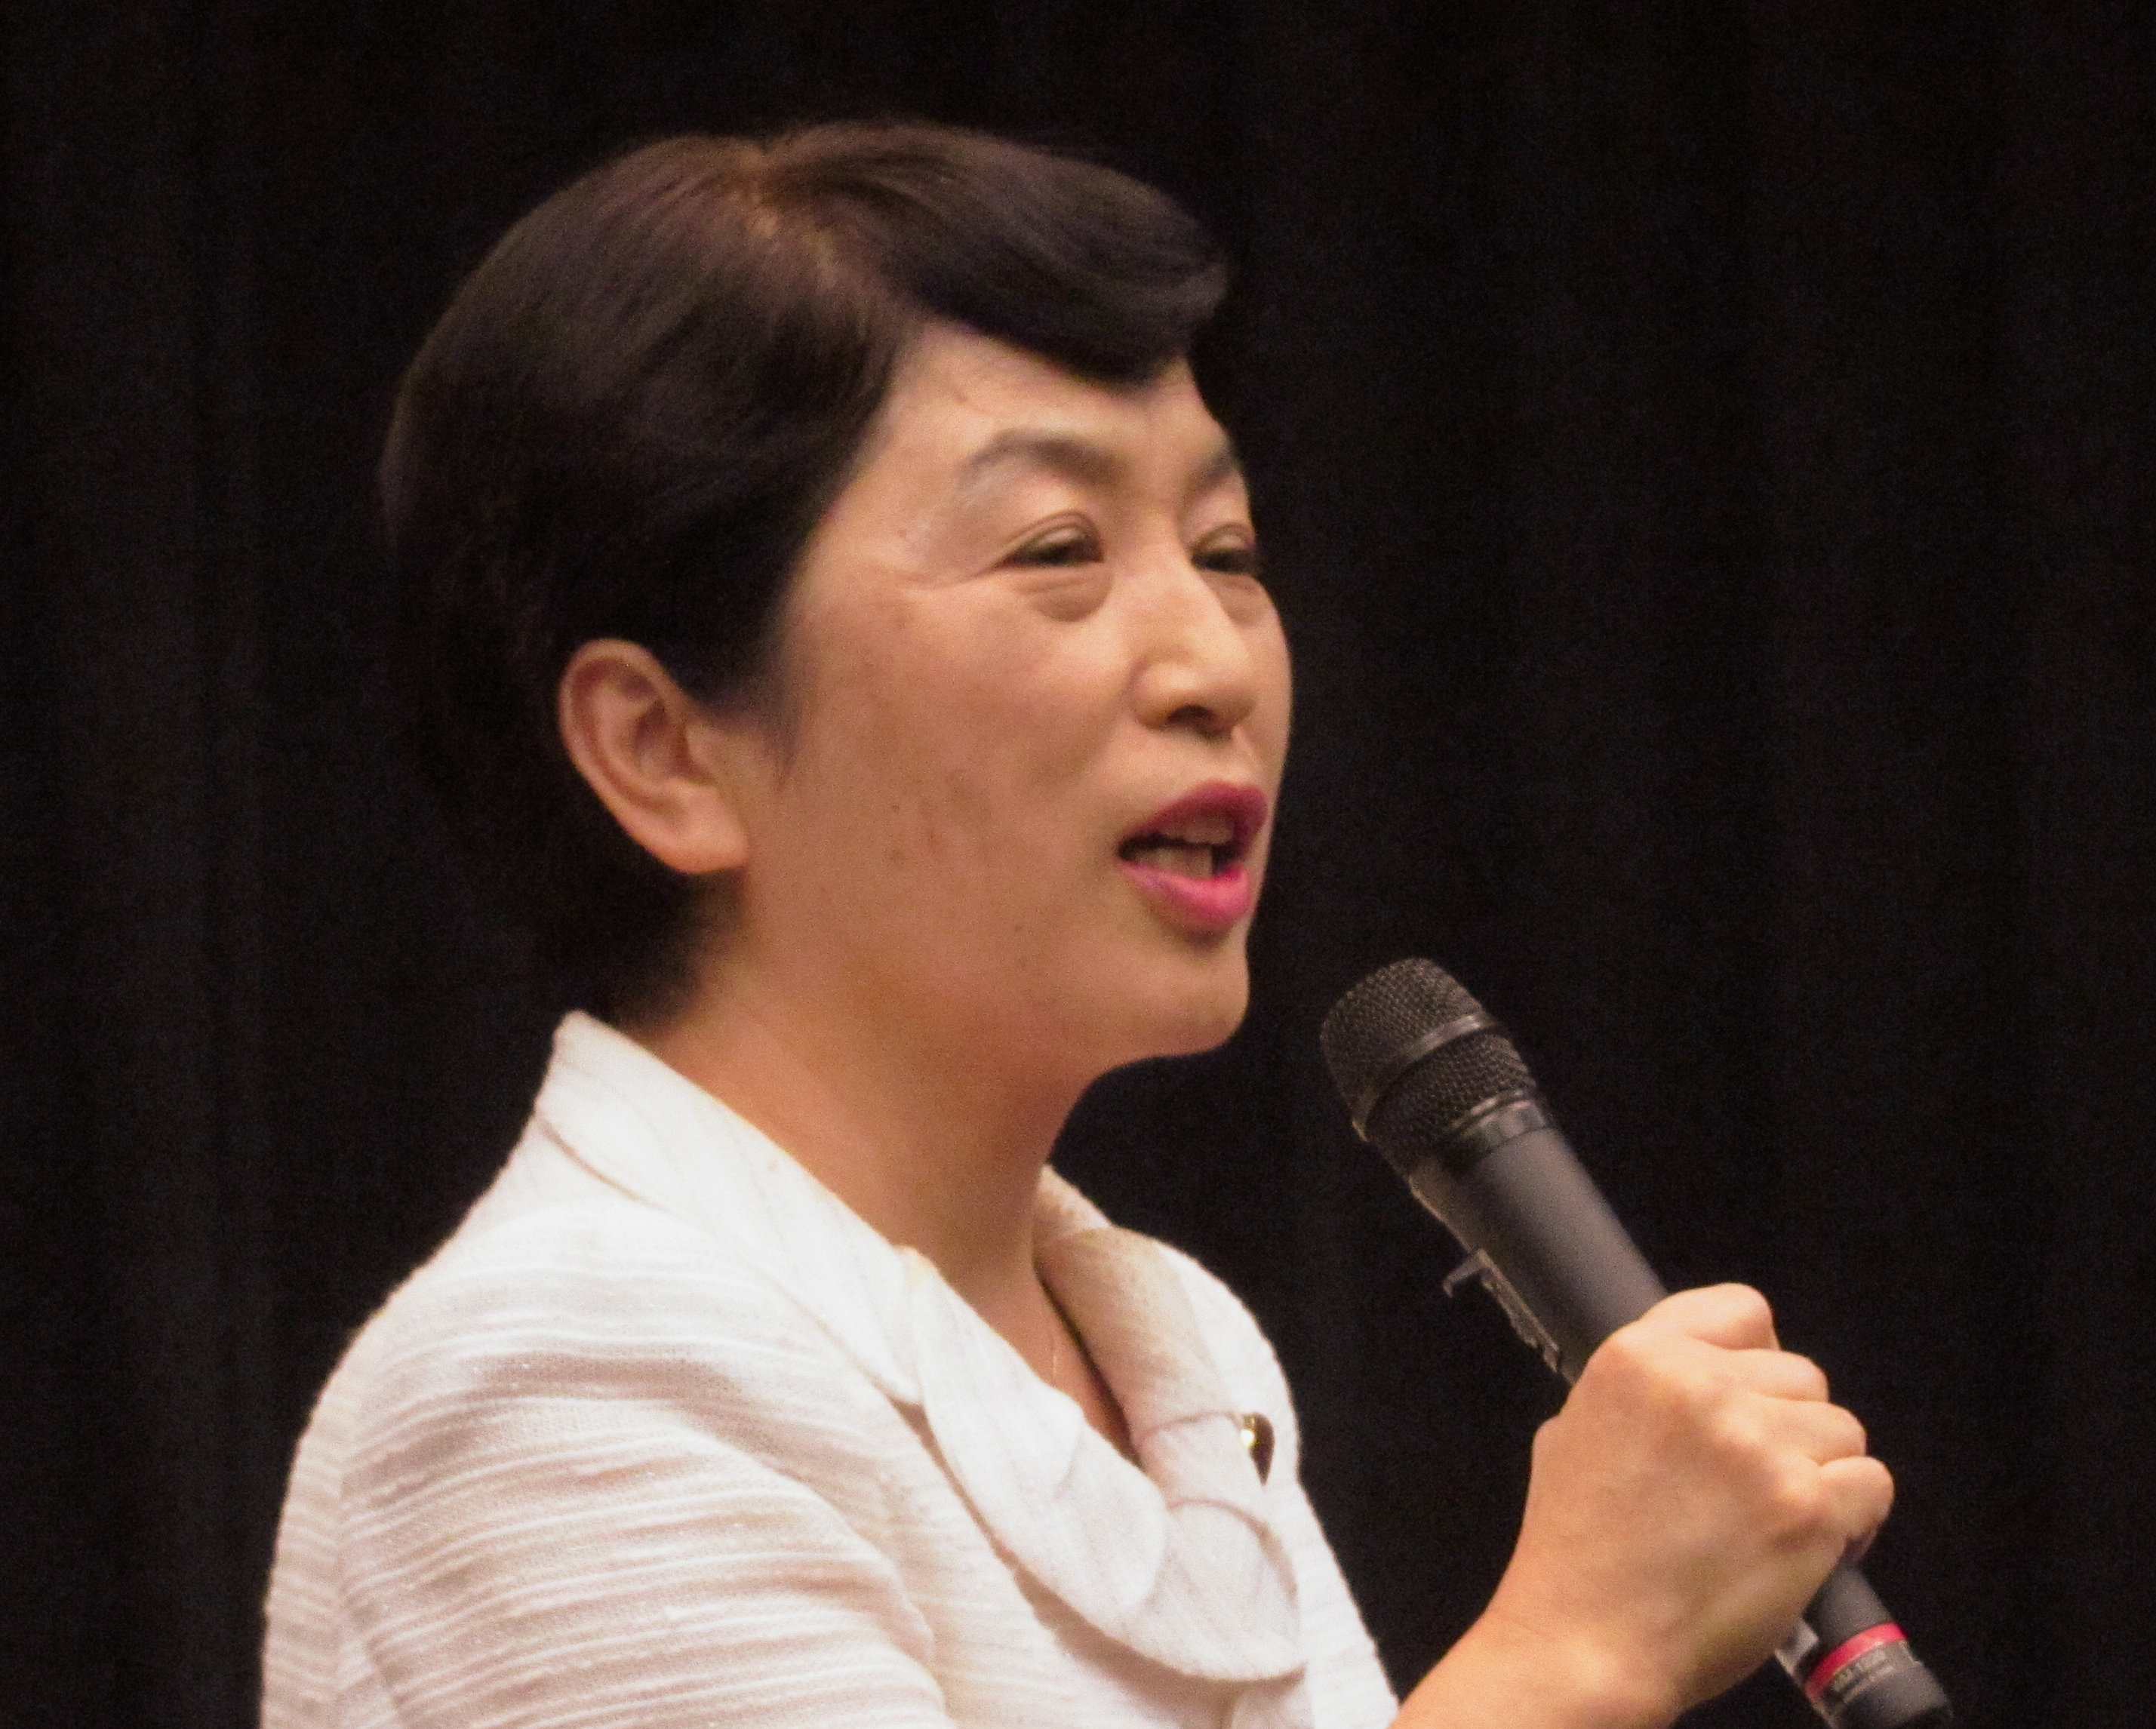 Mizuho Fukushima is a Japanese politician, and she is mostly known for being Minister of State for Consumer Affairs and Food Safety, Social Affairs, and Gender Equality in Prime Minister Yukio Hatoyama's cabinet since 2009 to 2010. This is a photo which taken at the House of Councillors on September 19, 2014 in Japan. Photographed and edited by the Japanese filmmaker, Corman Award Winner Ryota Nakanishi who is the professional film editor of the 2013 Amazon and Oricon bestseller Japanese film Rakugo-Eiga.